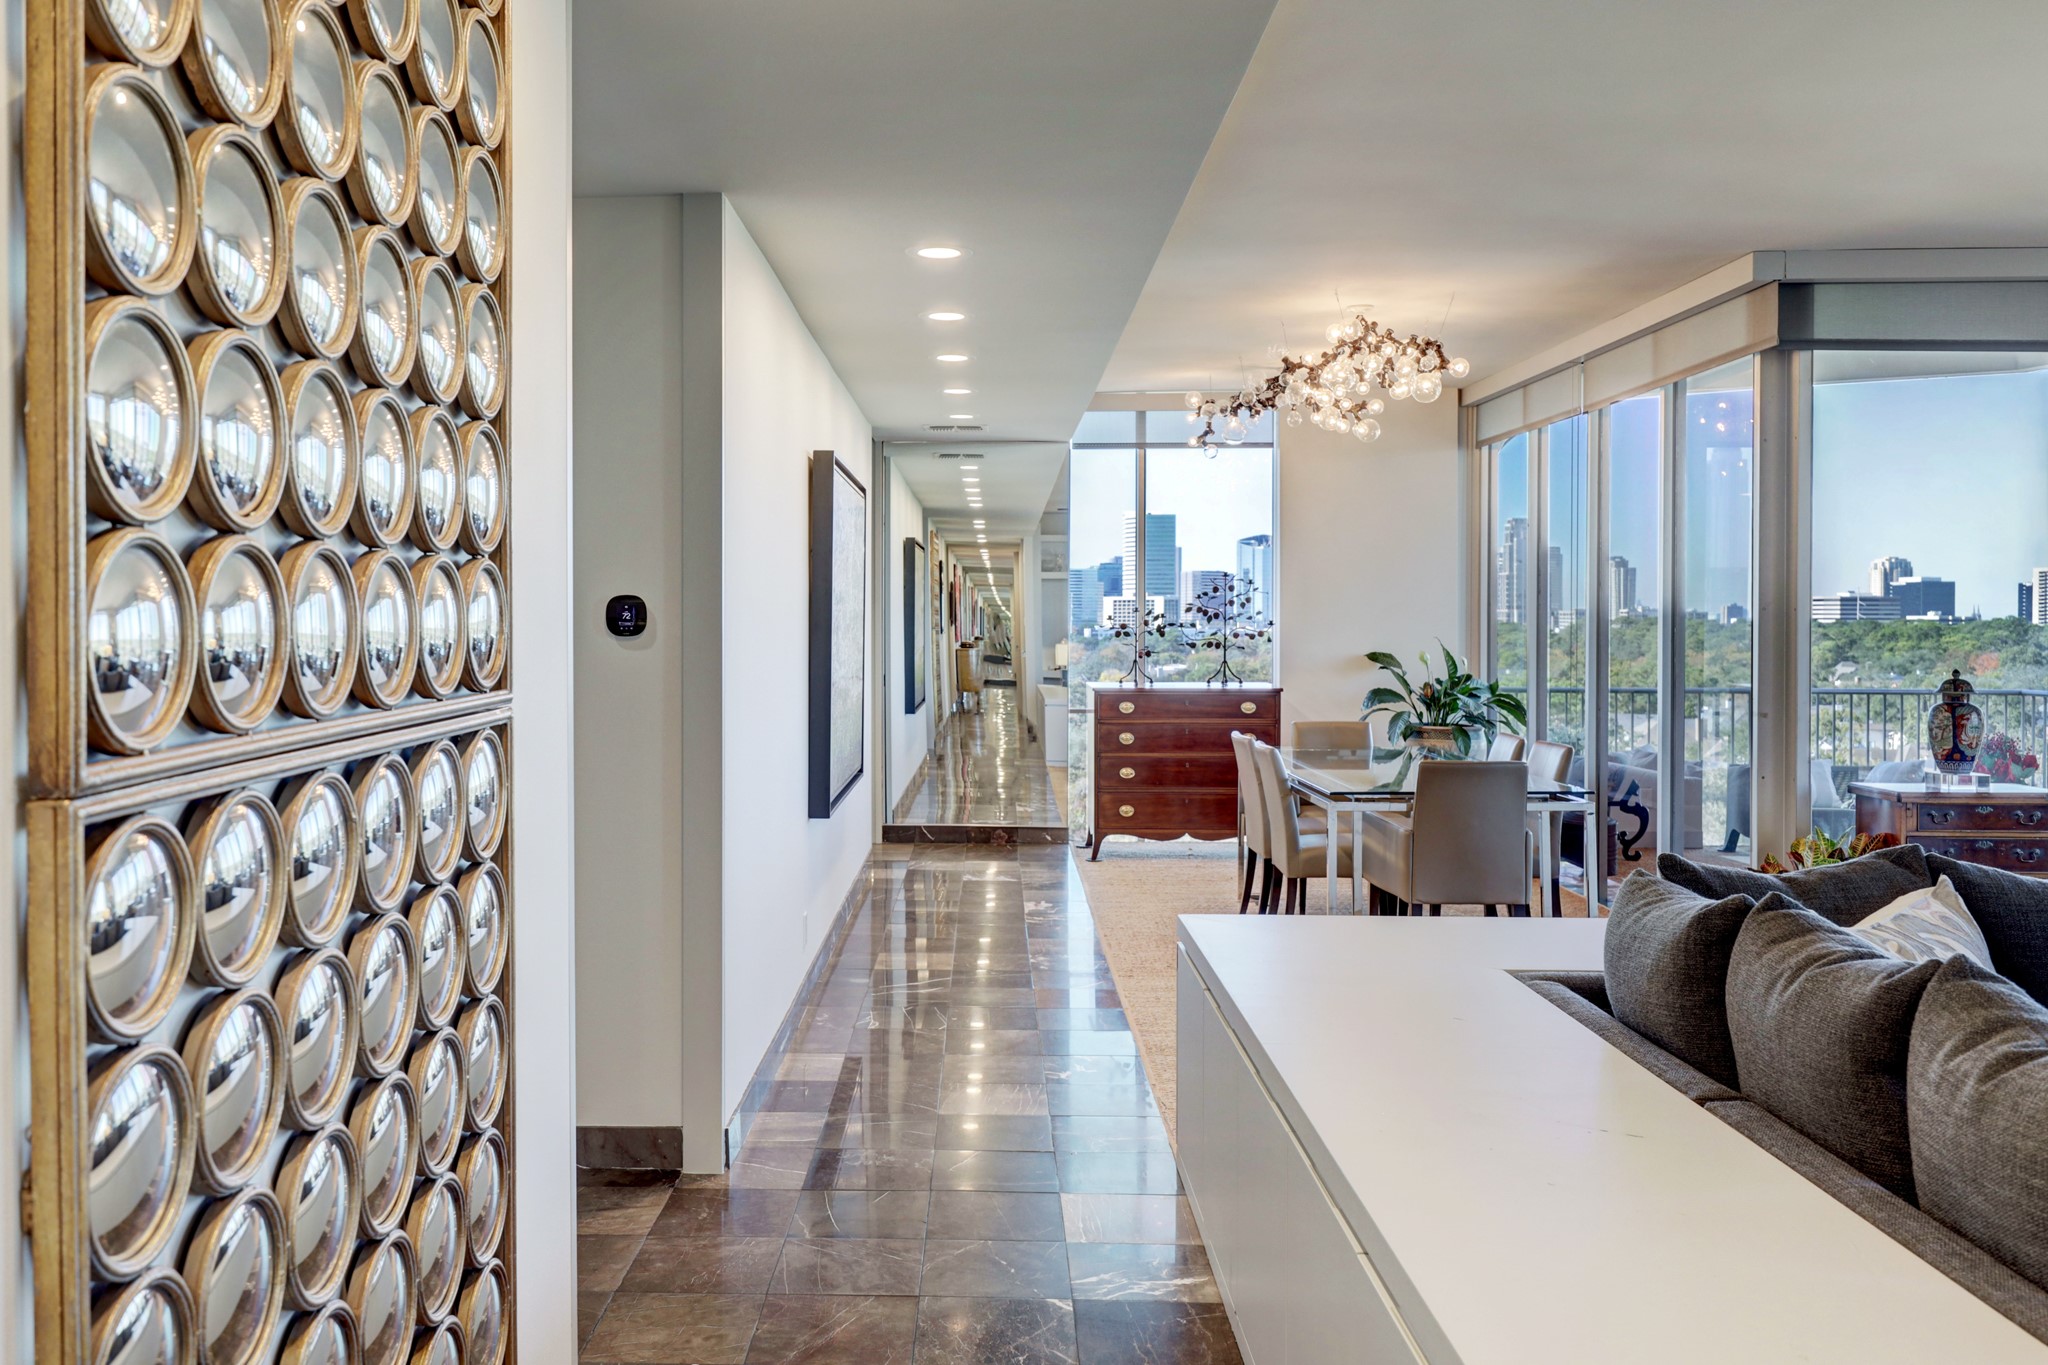 Reception / Formal Rooms]
The foyer expands into the light filled reception area and formal rooms. Lavish use of mirrored walls adds depth to the open floorplan. Full length windows, glass sliding doors, and a wide tiled balcony enhance spacious, elegant formal rooms.